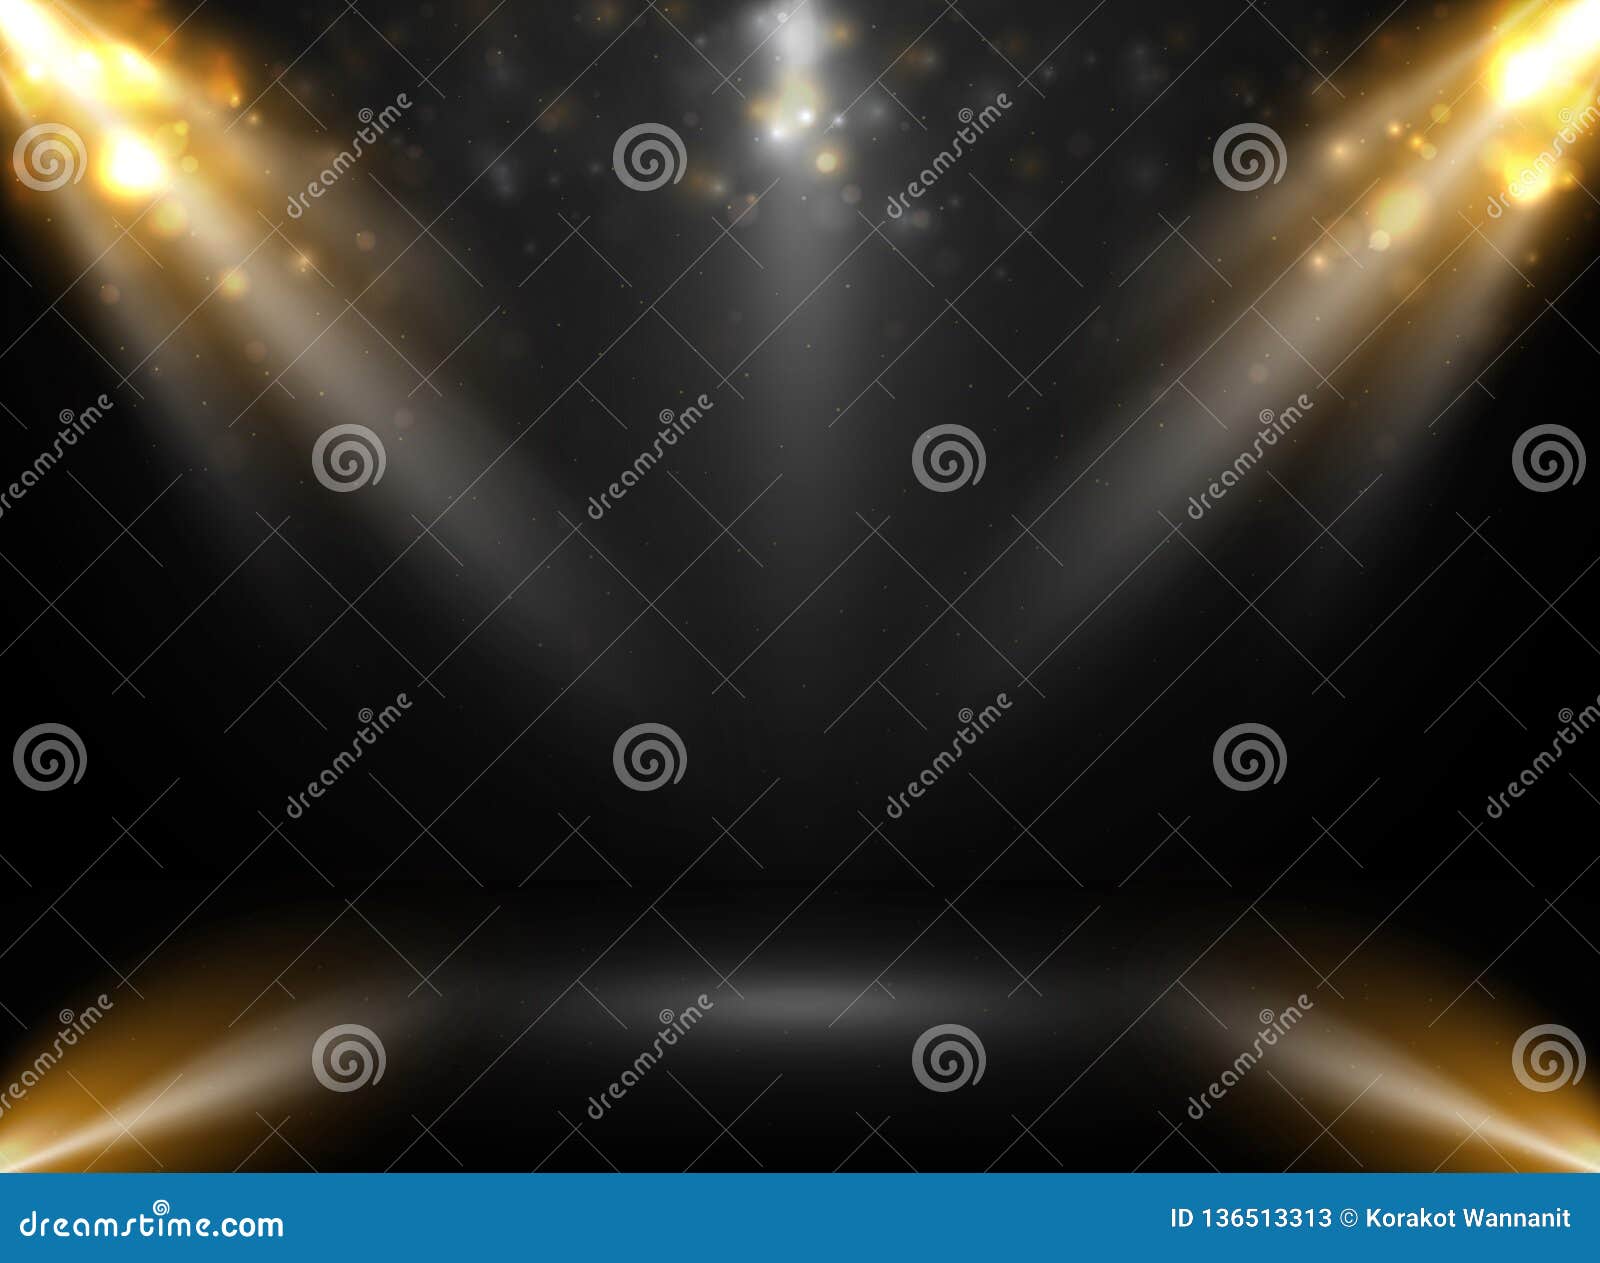 abstract of mockup stage show in gradient black background with spotlights bokeh